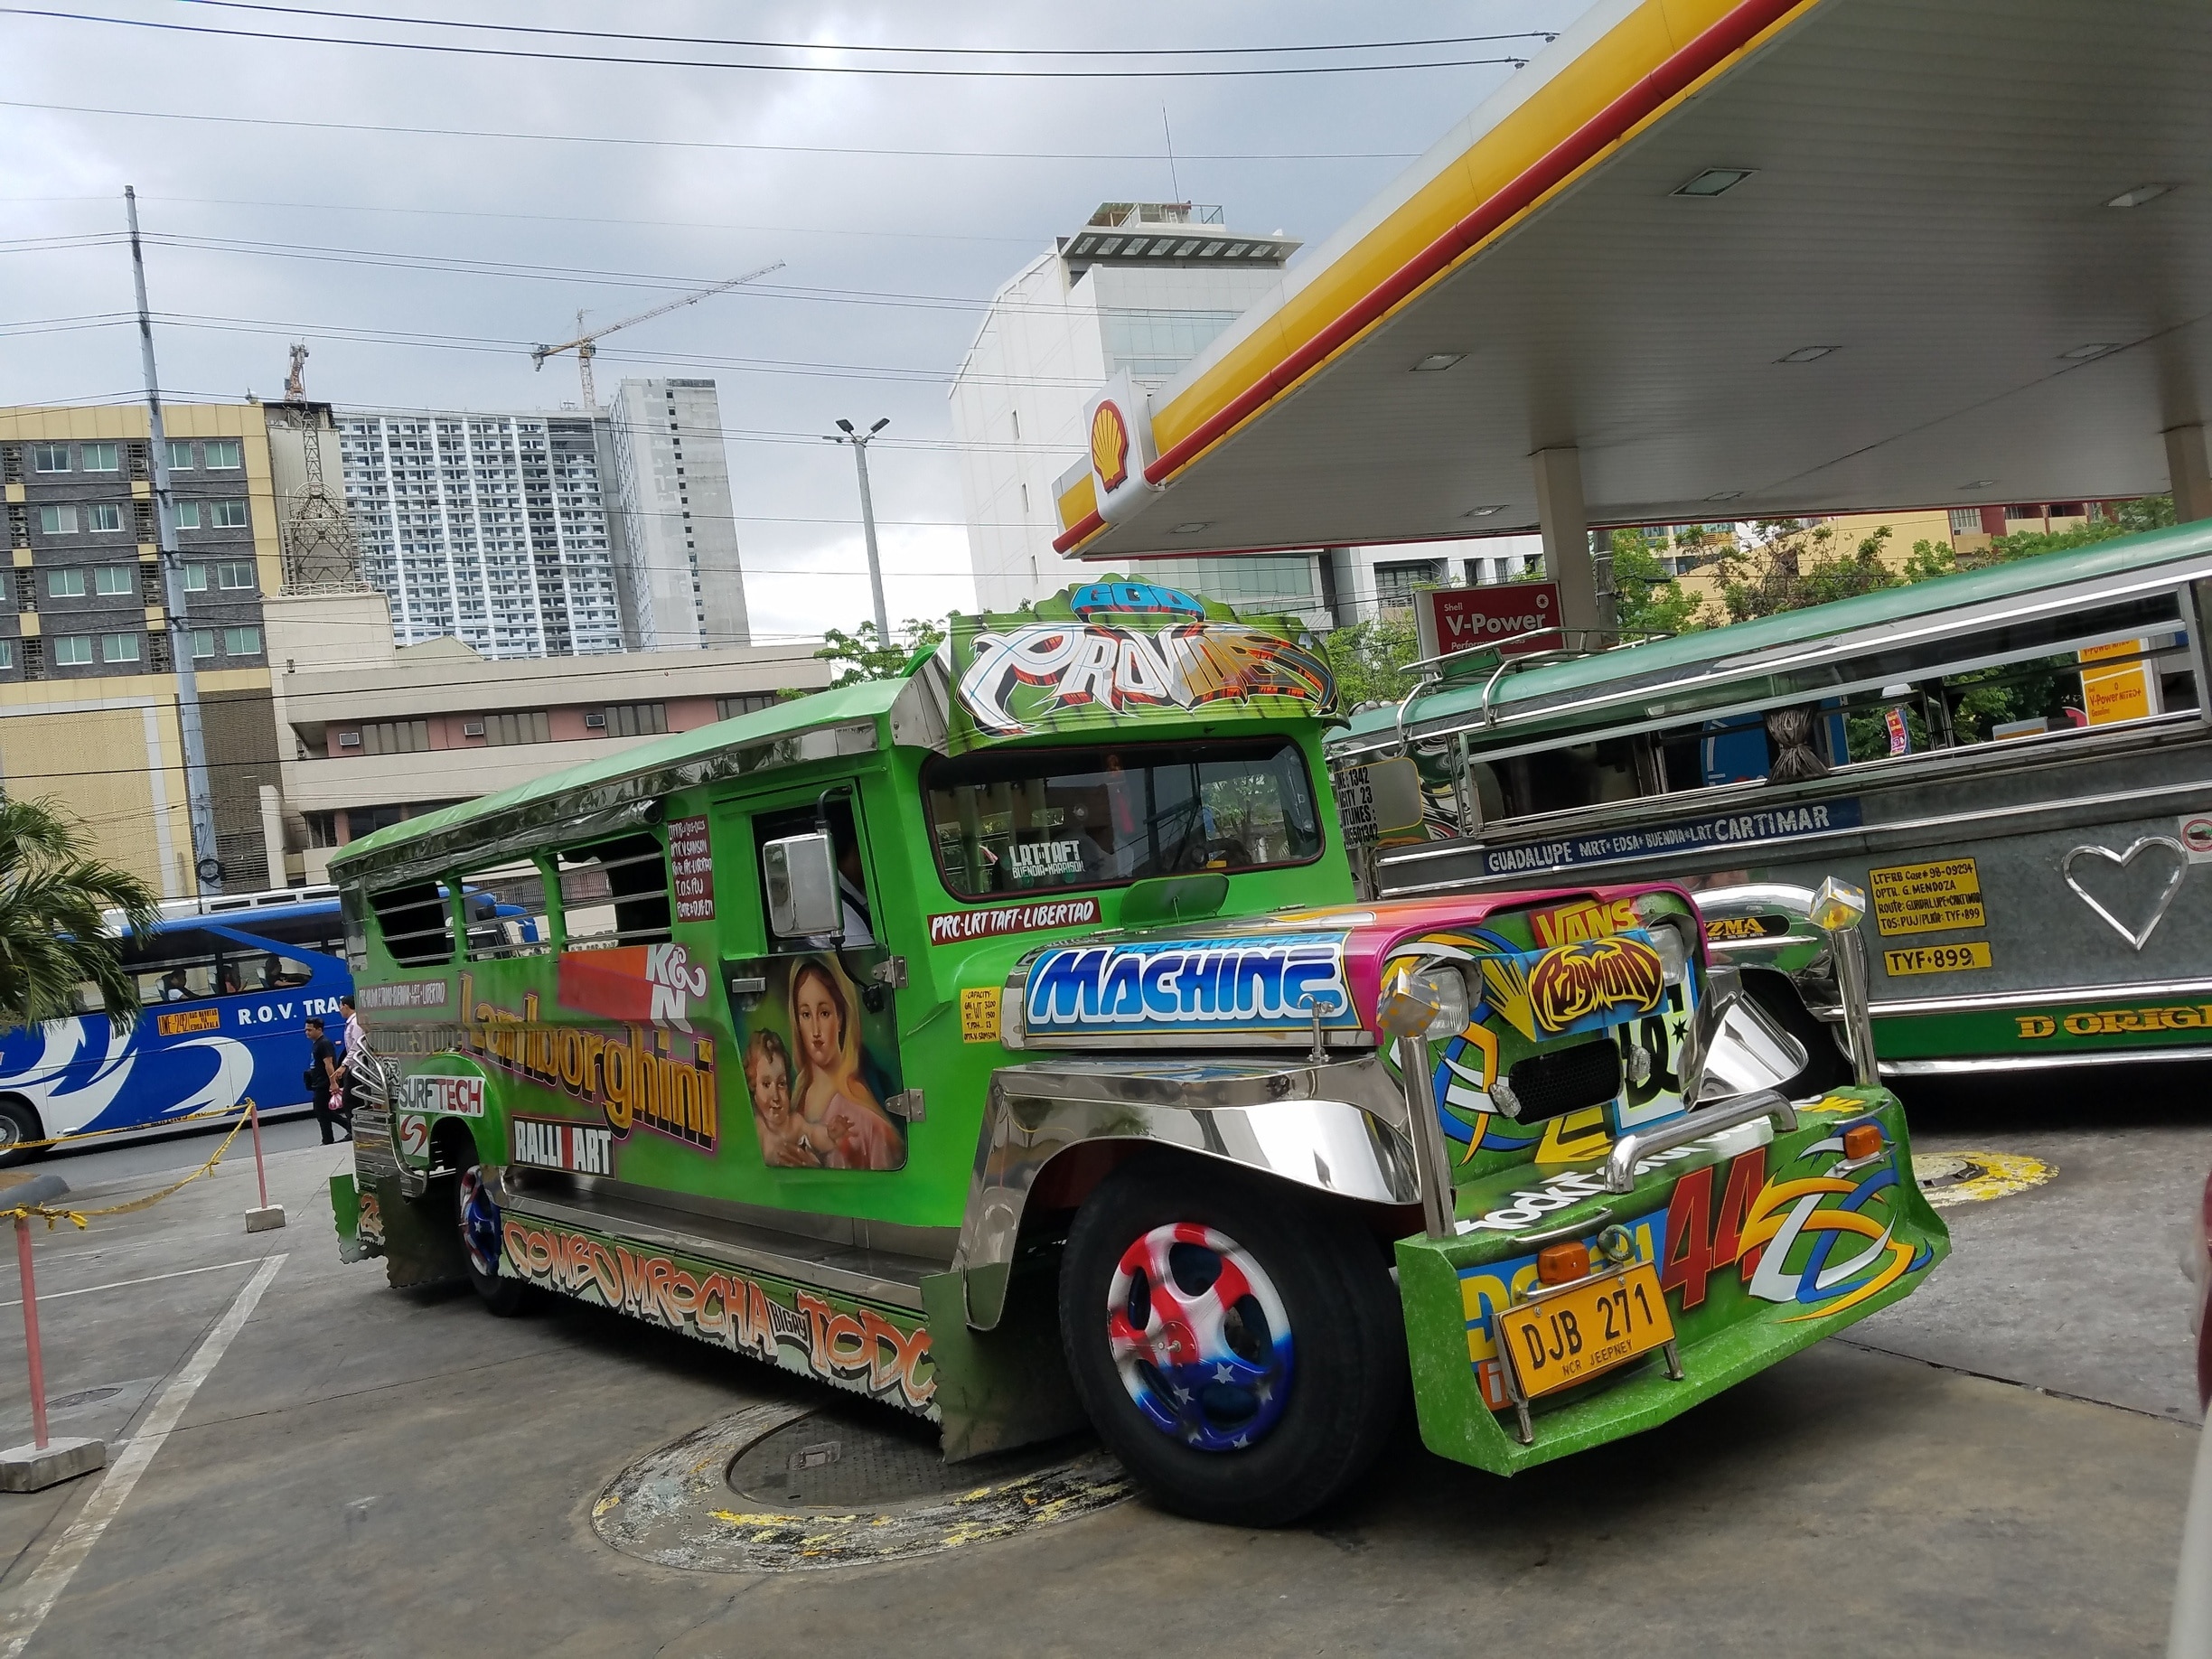 Definitive jeepney pic. Check. #LifeAtExpedia